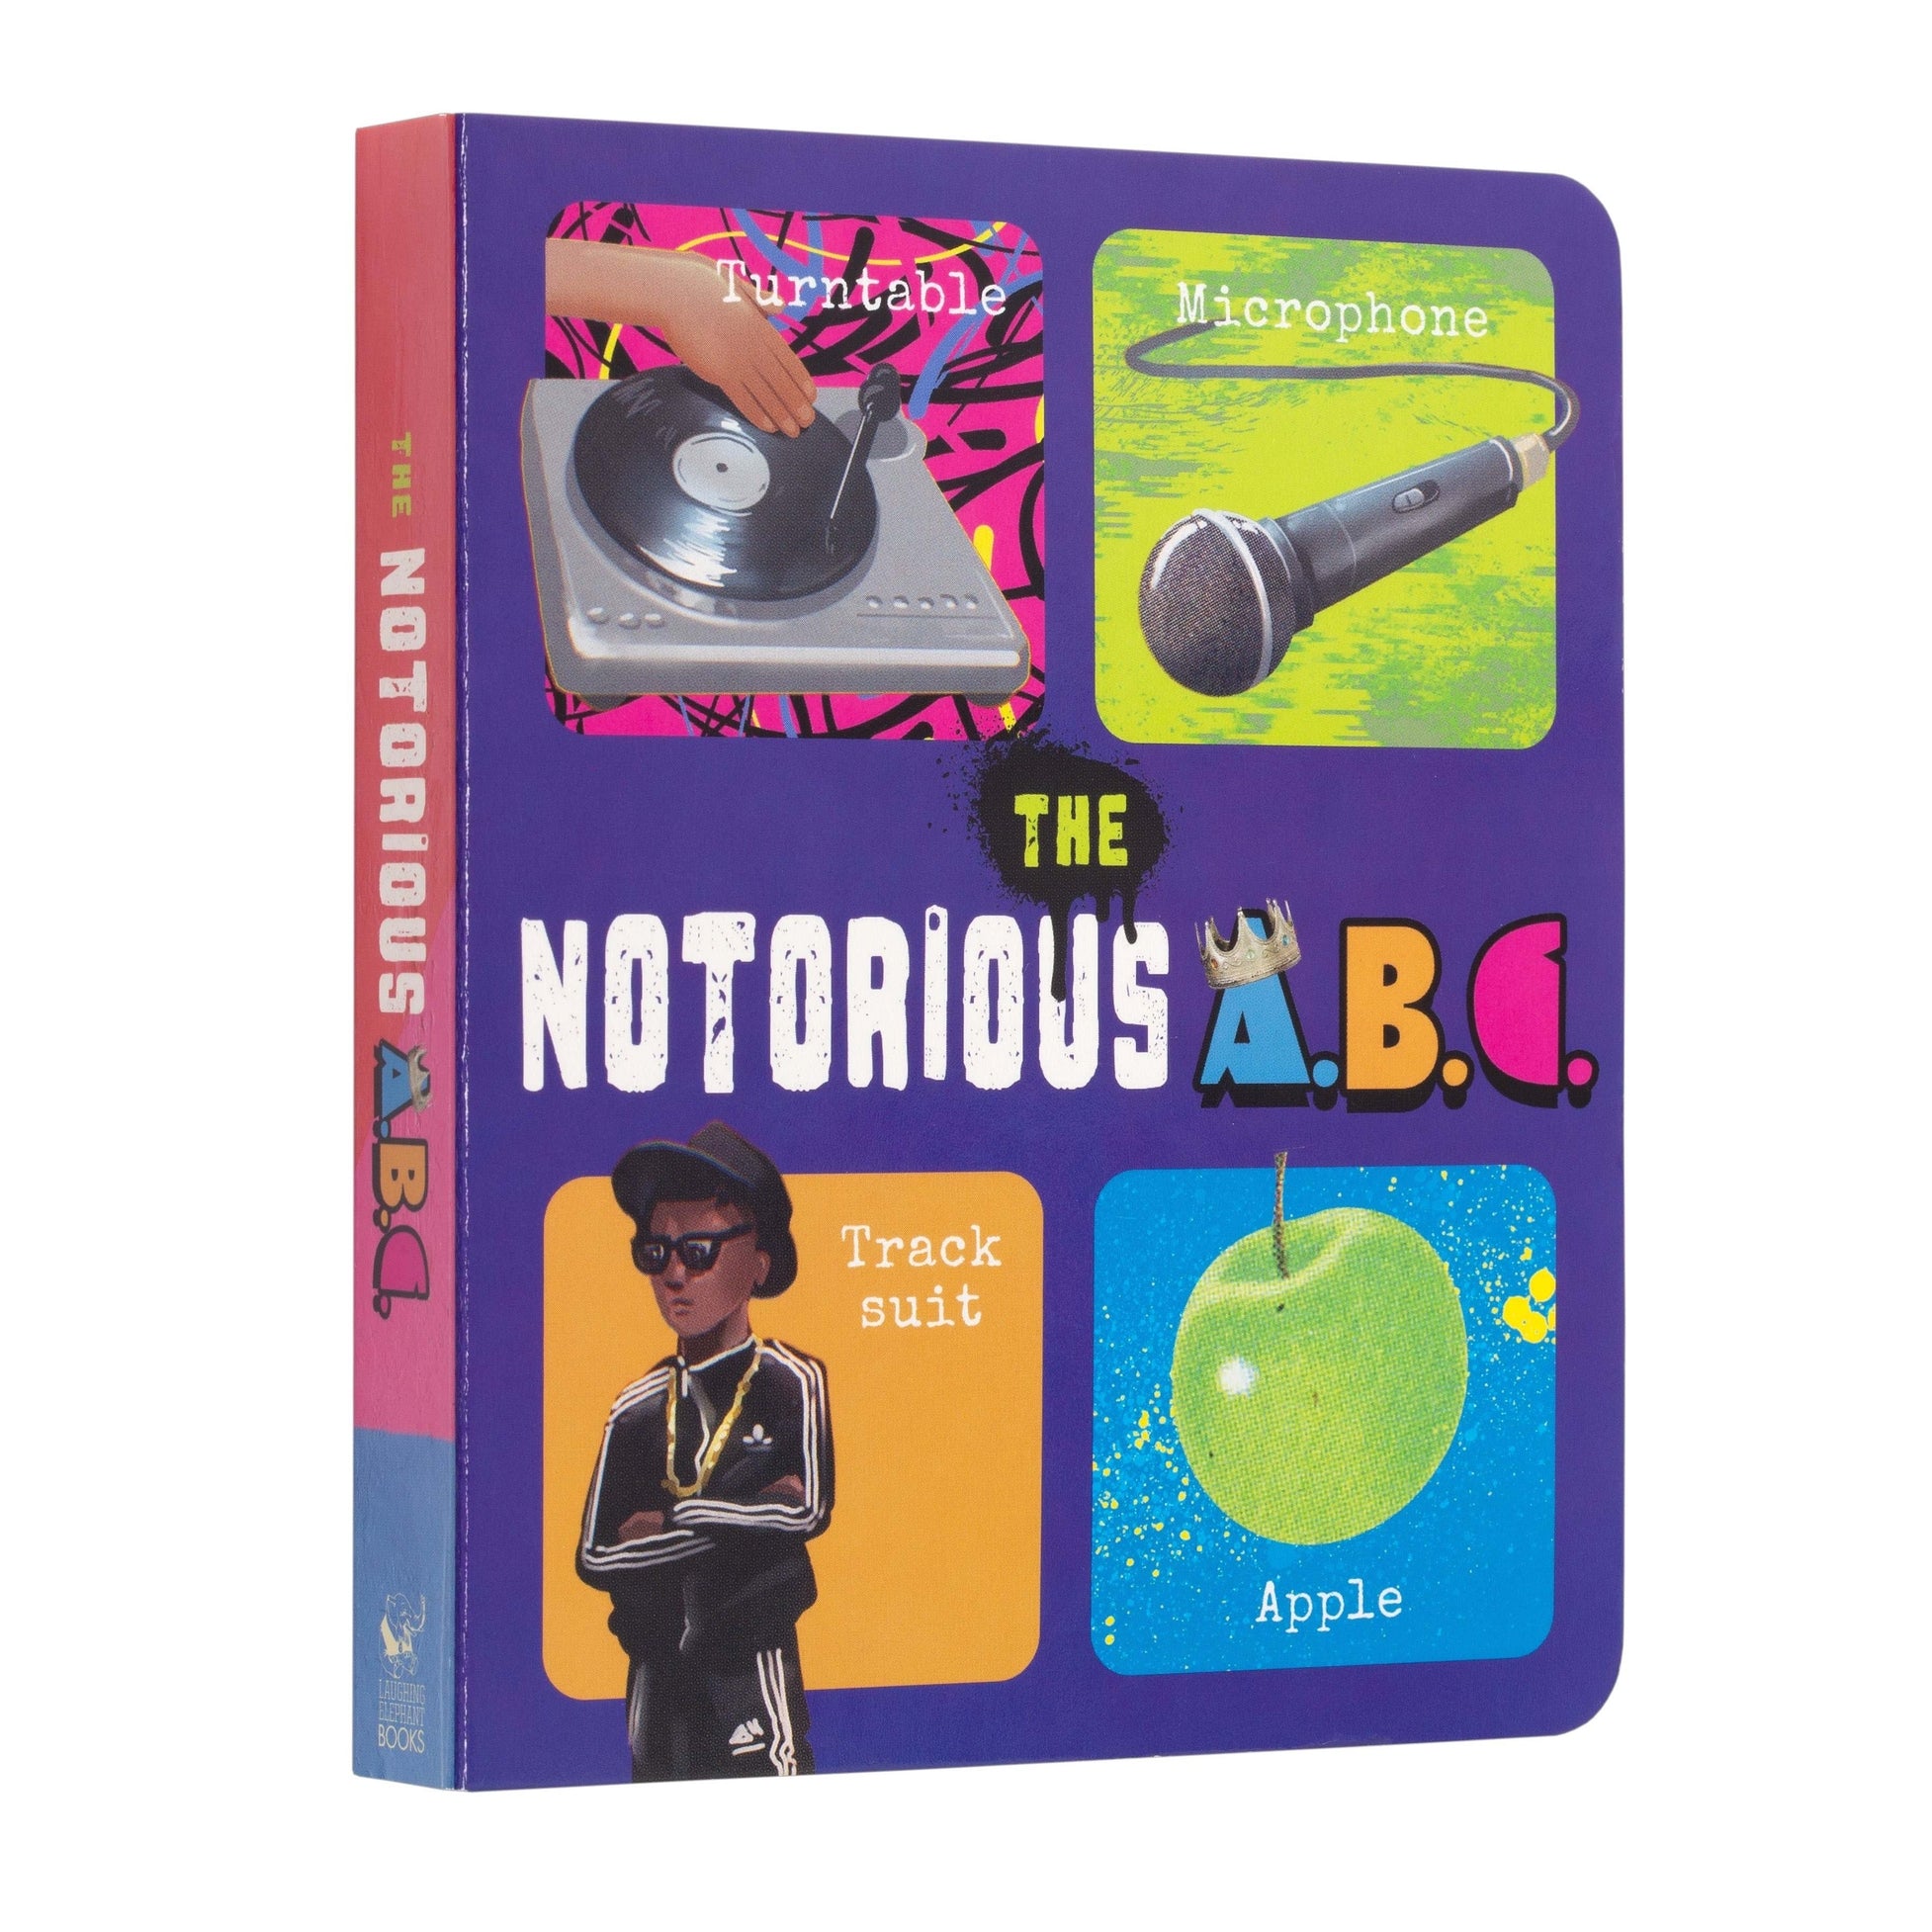 The Notorious A.B.C. Board Book